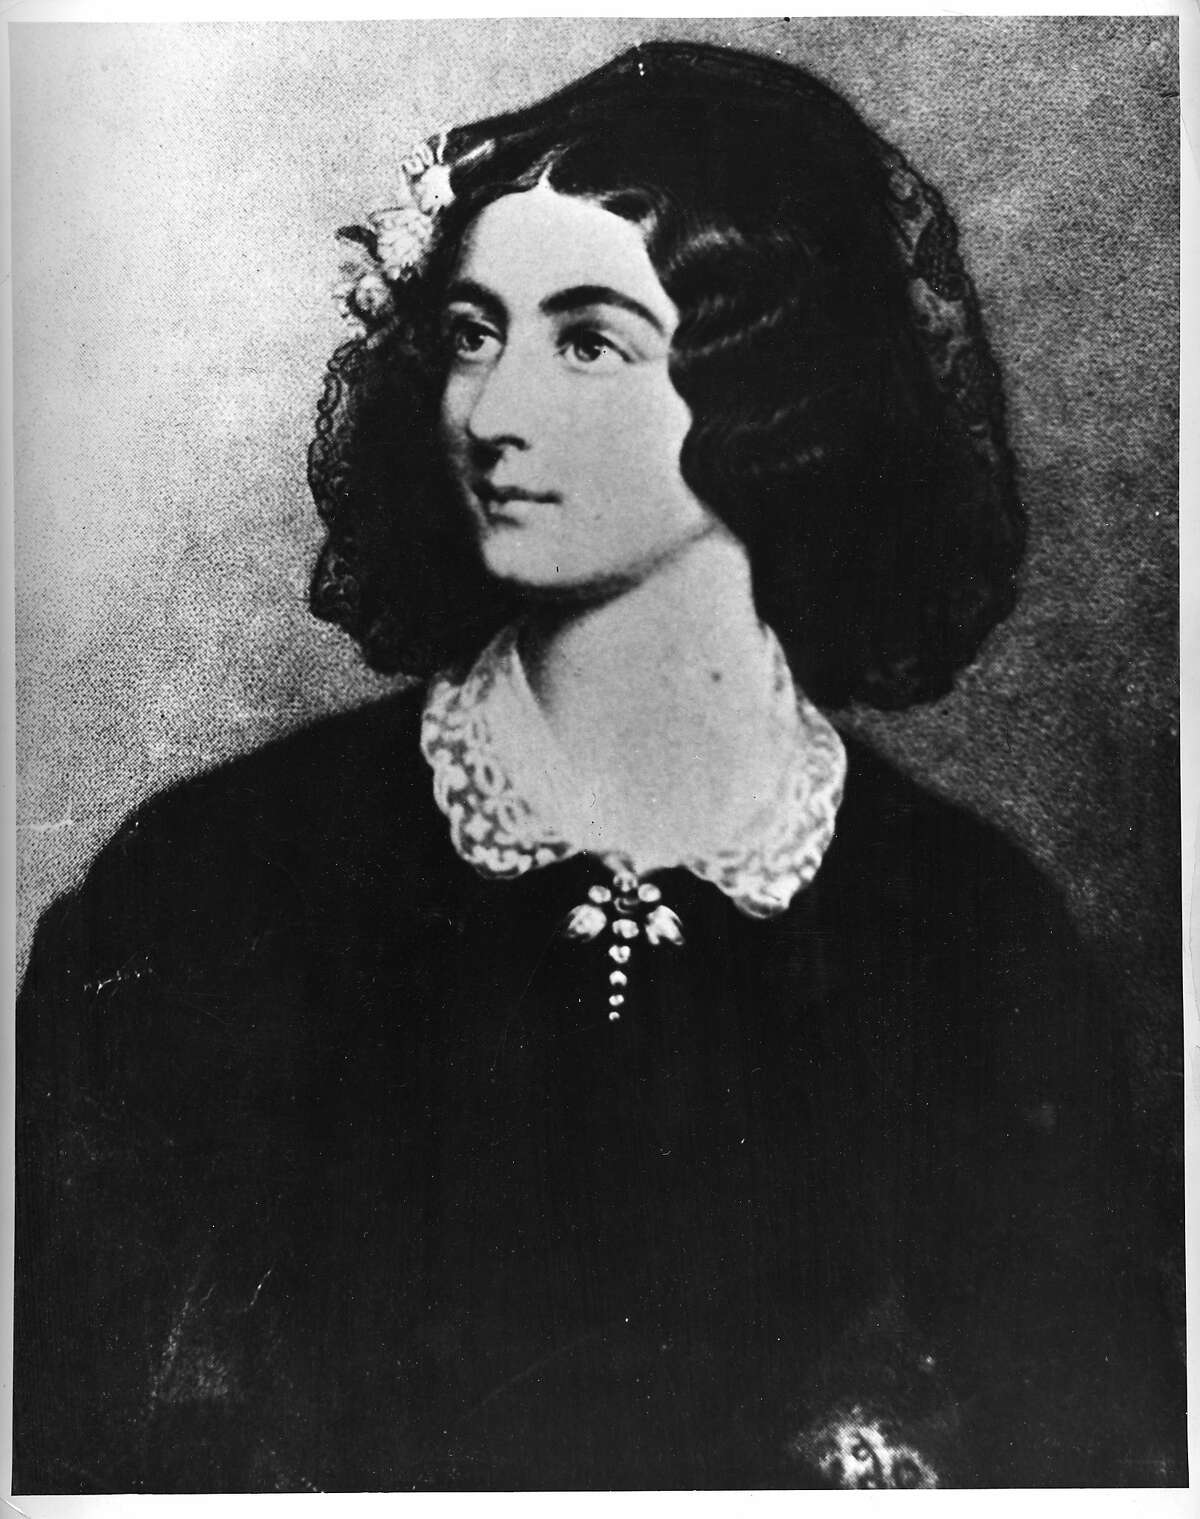 Lola Montez, as she appeared at the height of her popularity.